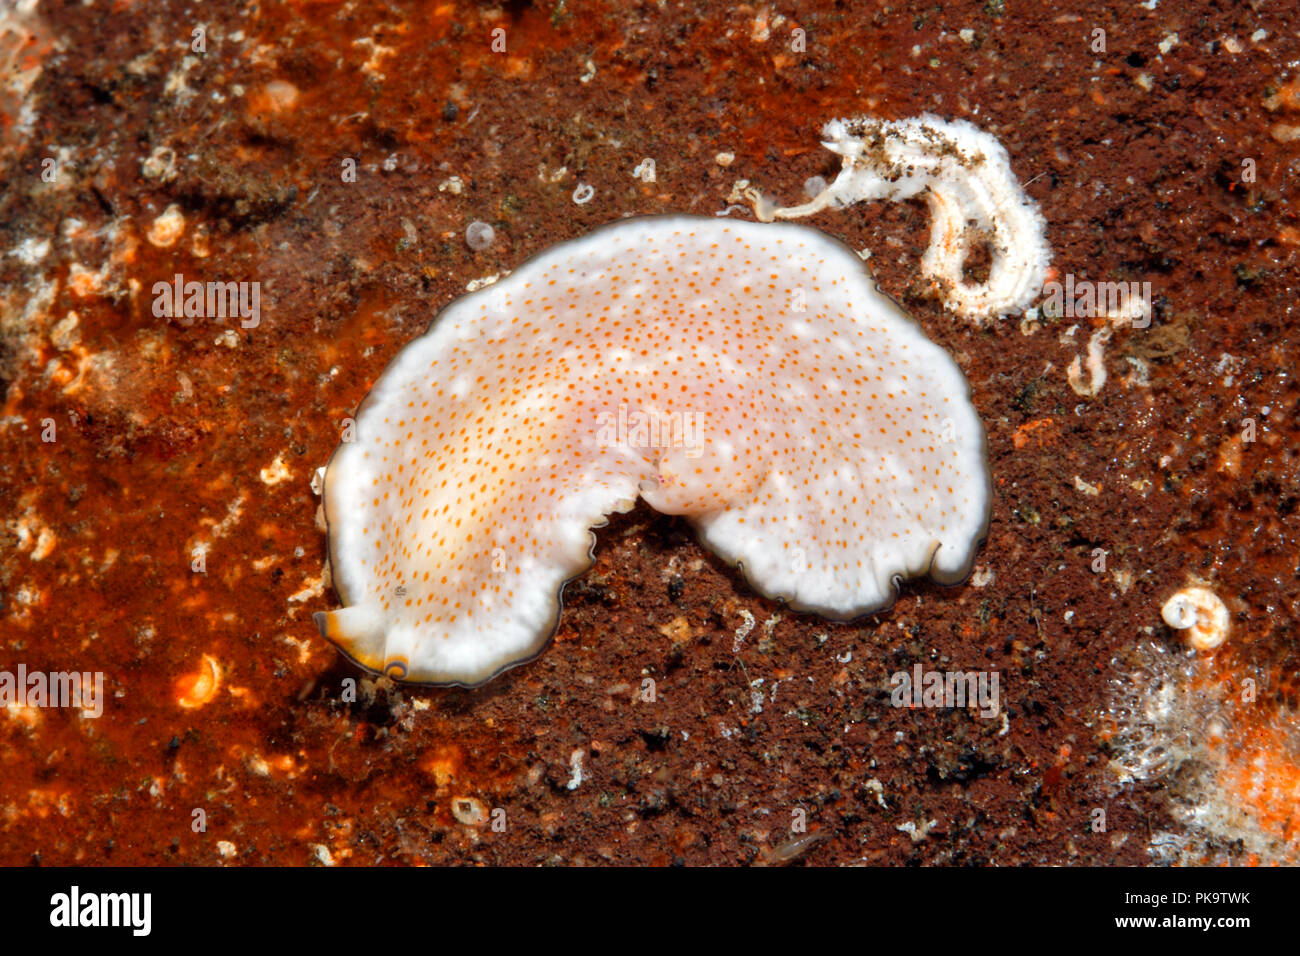 Marine Flatworm, Pseudoceros sp. Appears to be undescribed. Tulamben, Bali, Indonesia. Bali Sea, Indian Ocean Stock Photo